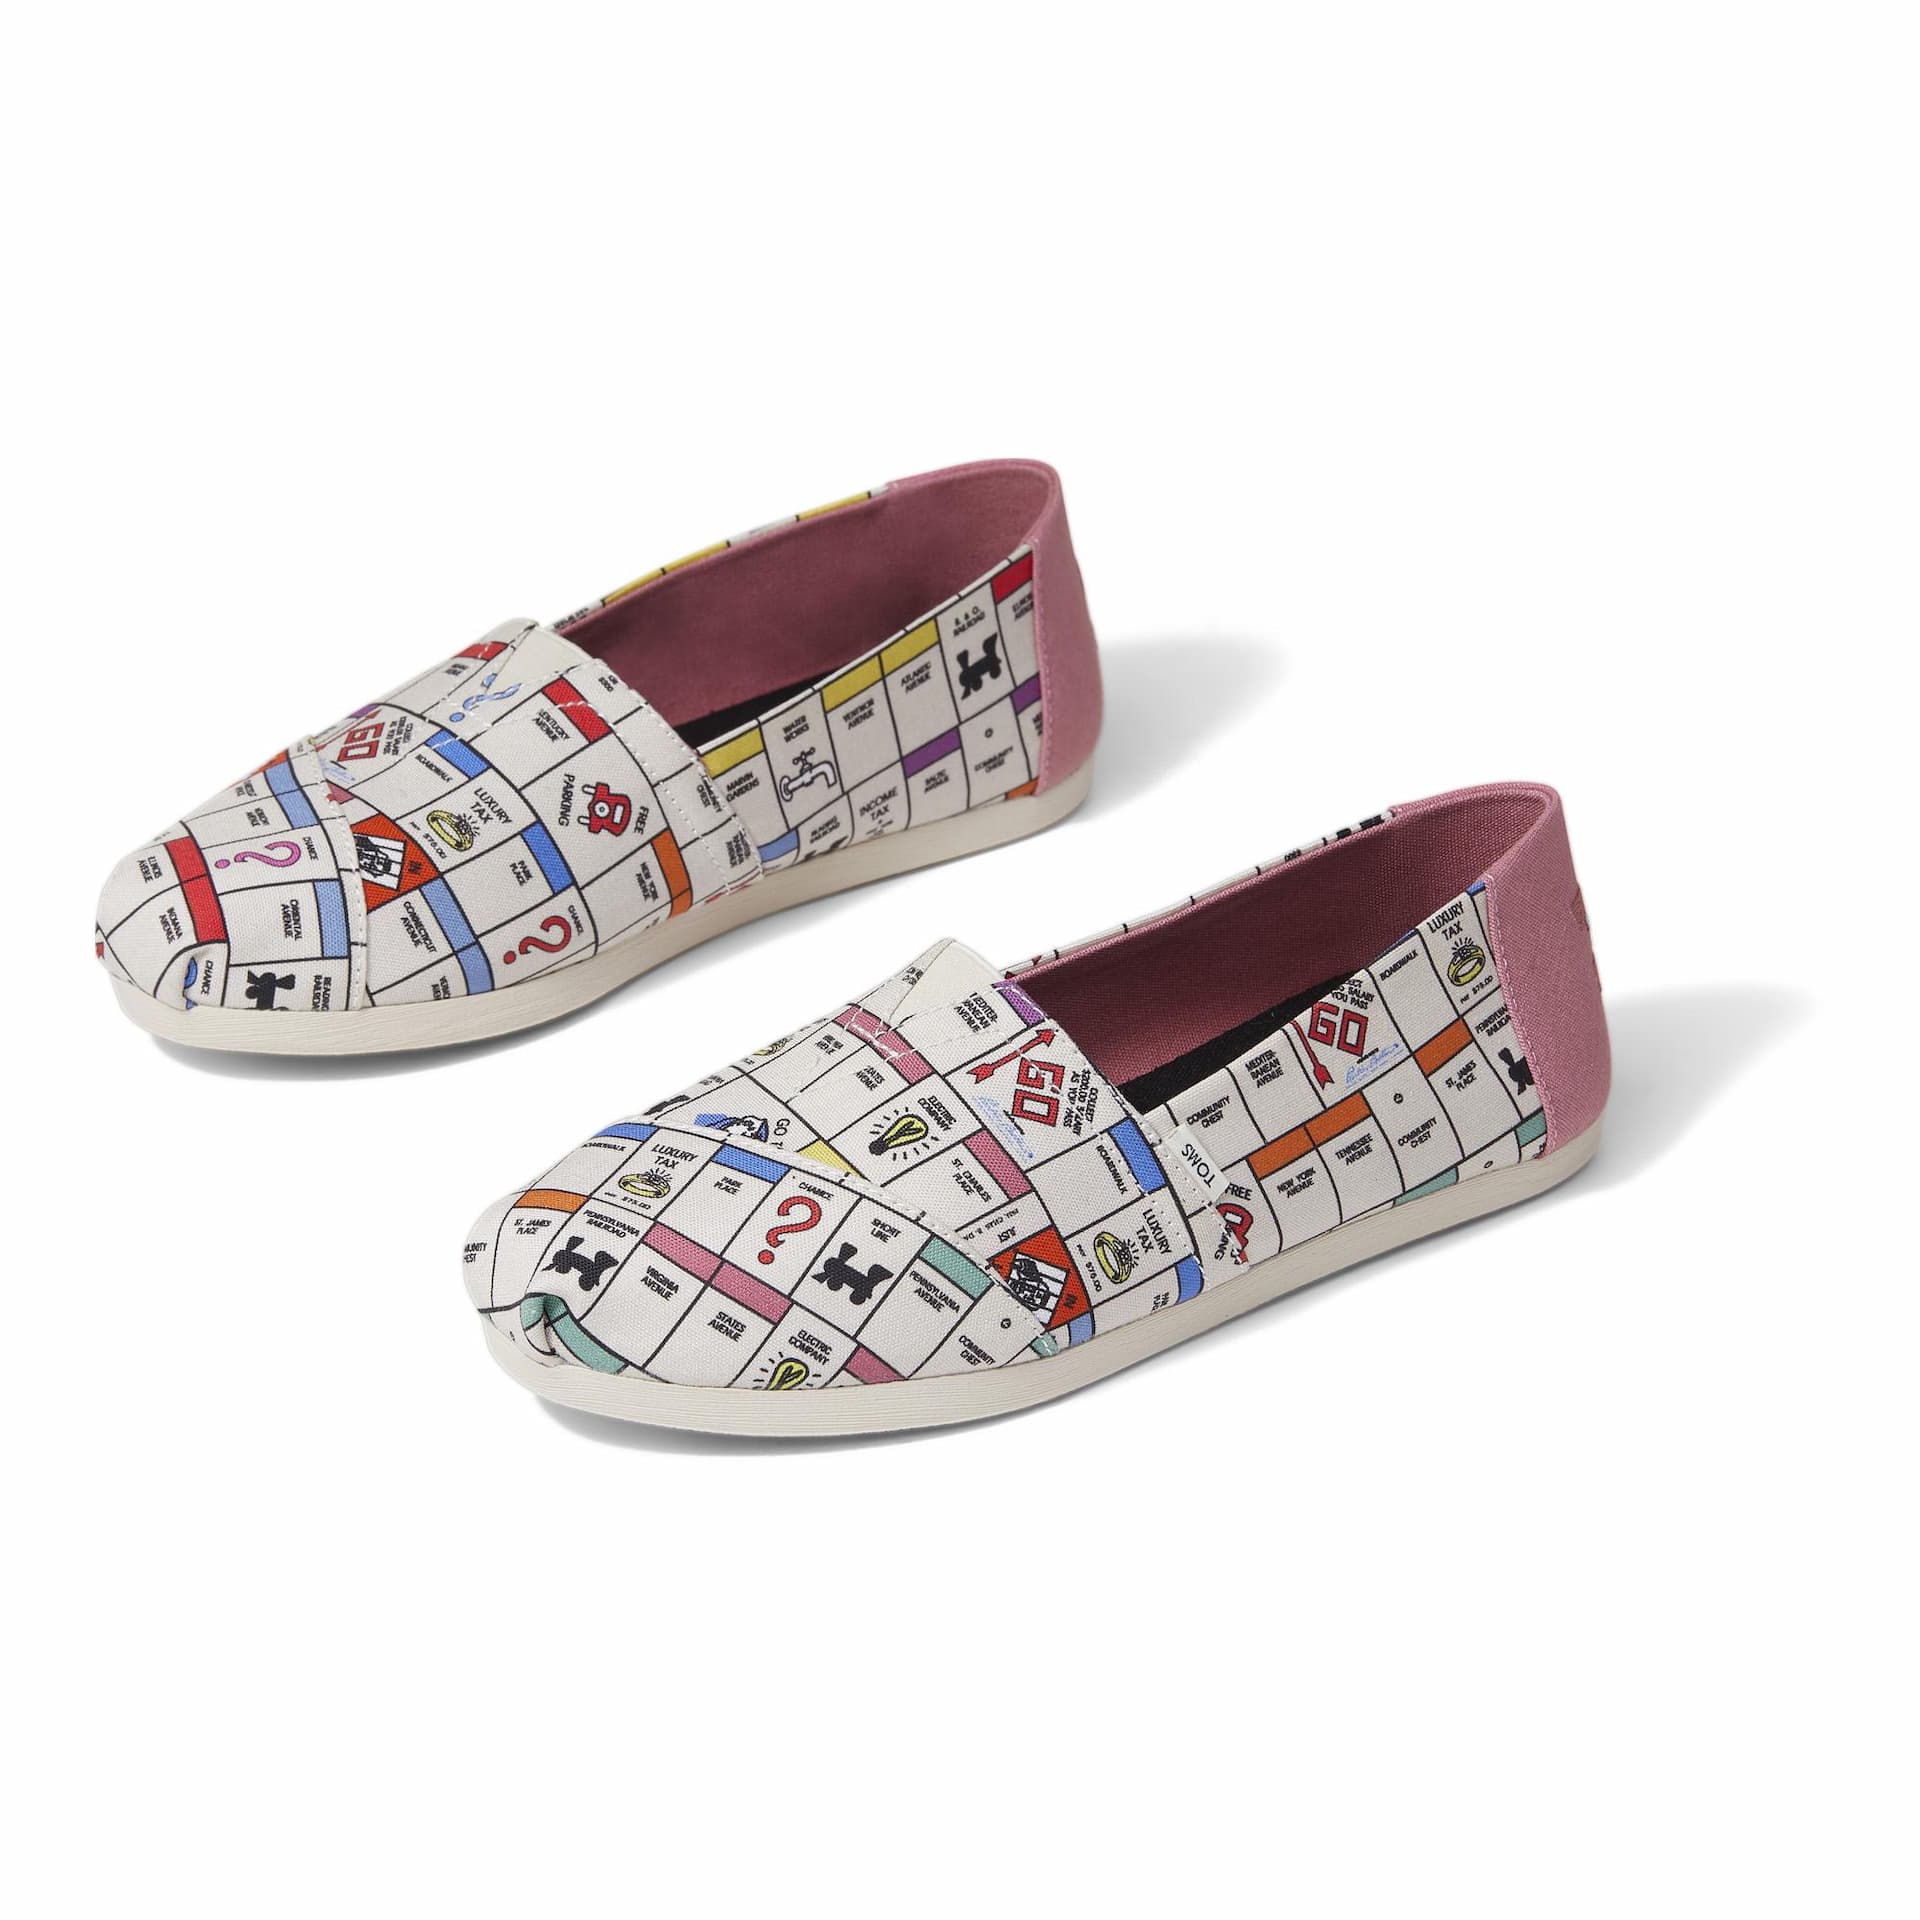 TOMS x Monopoly - Natural Monopoly Game Board Print